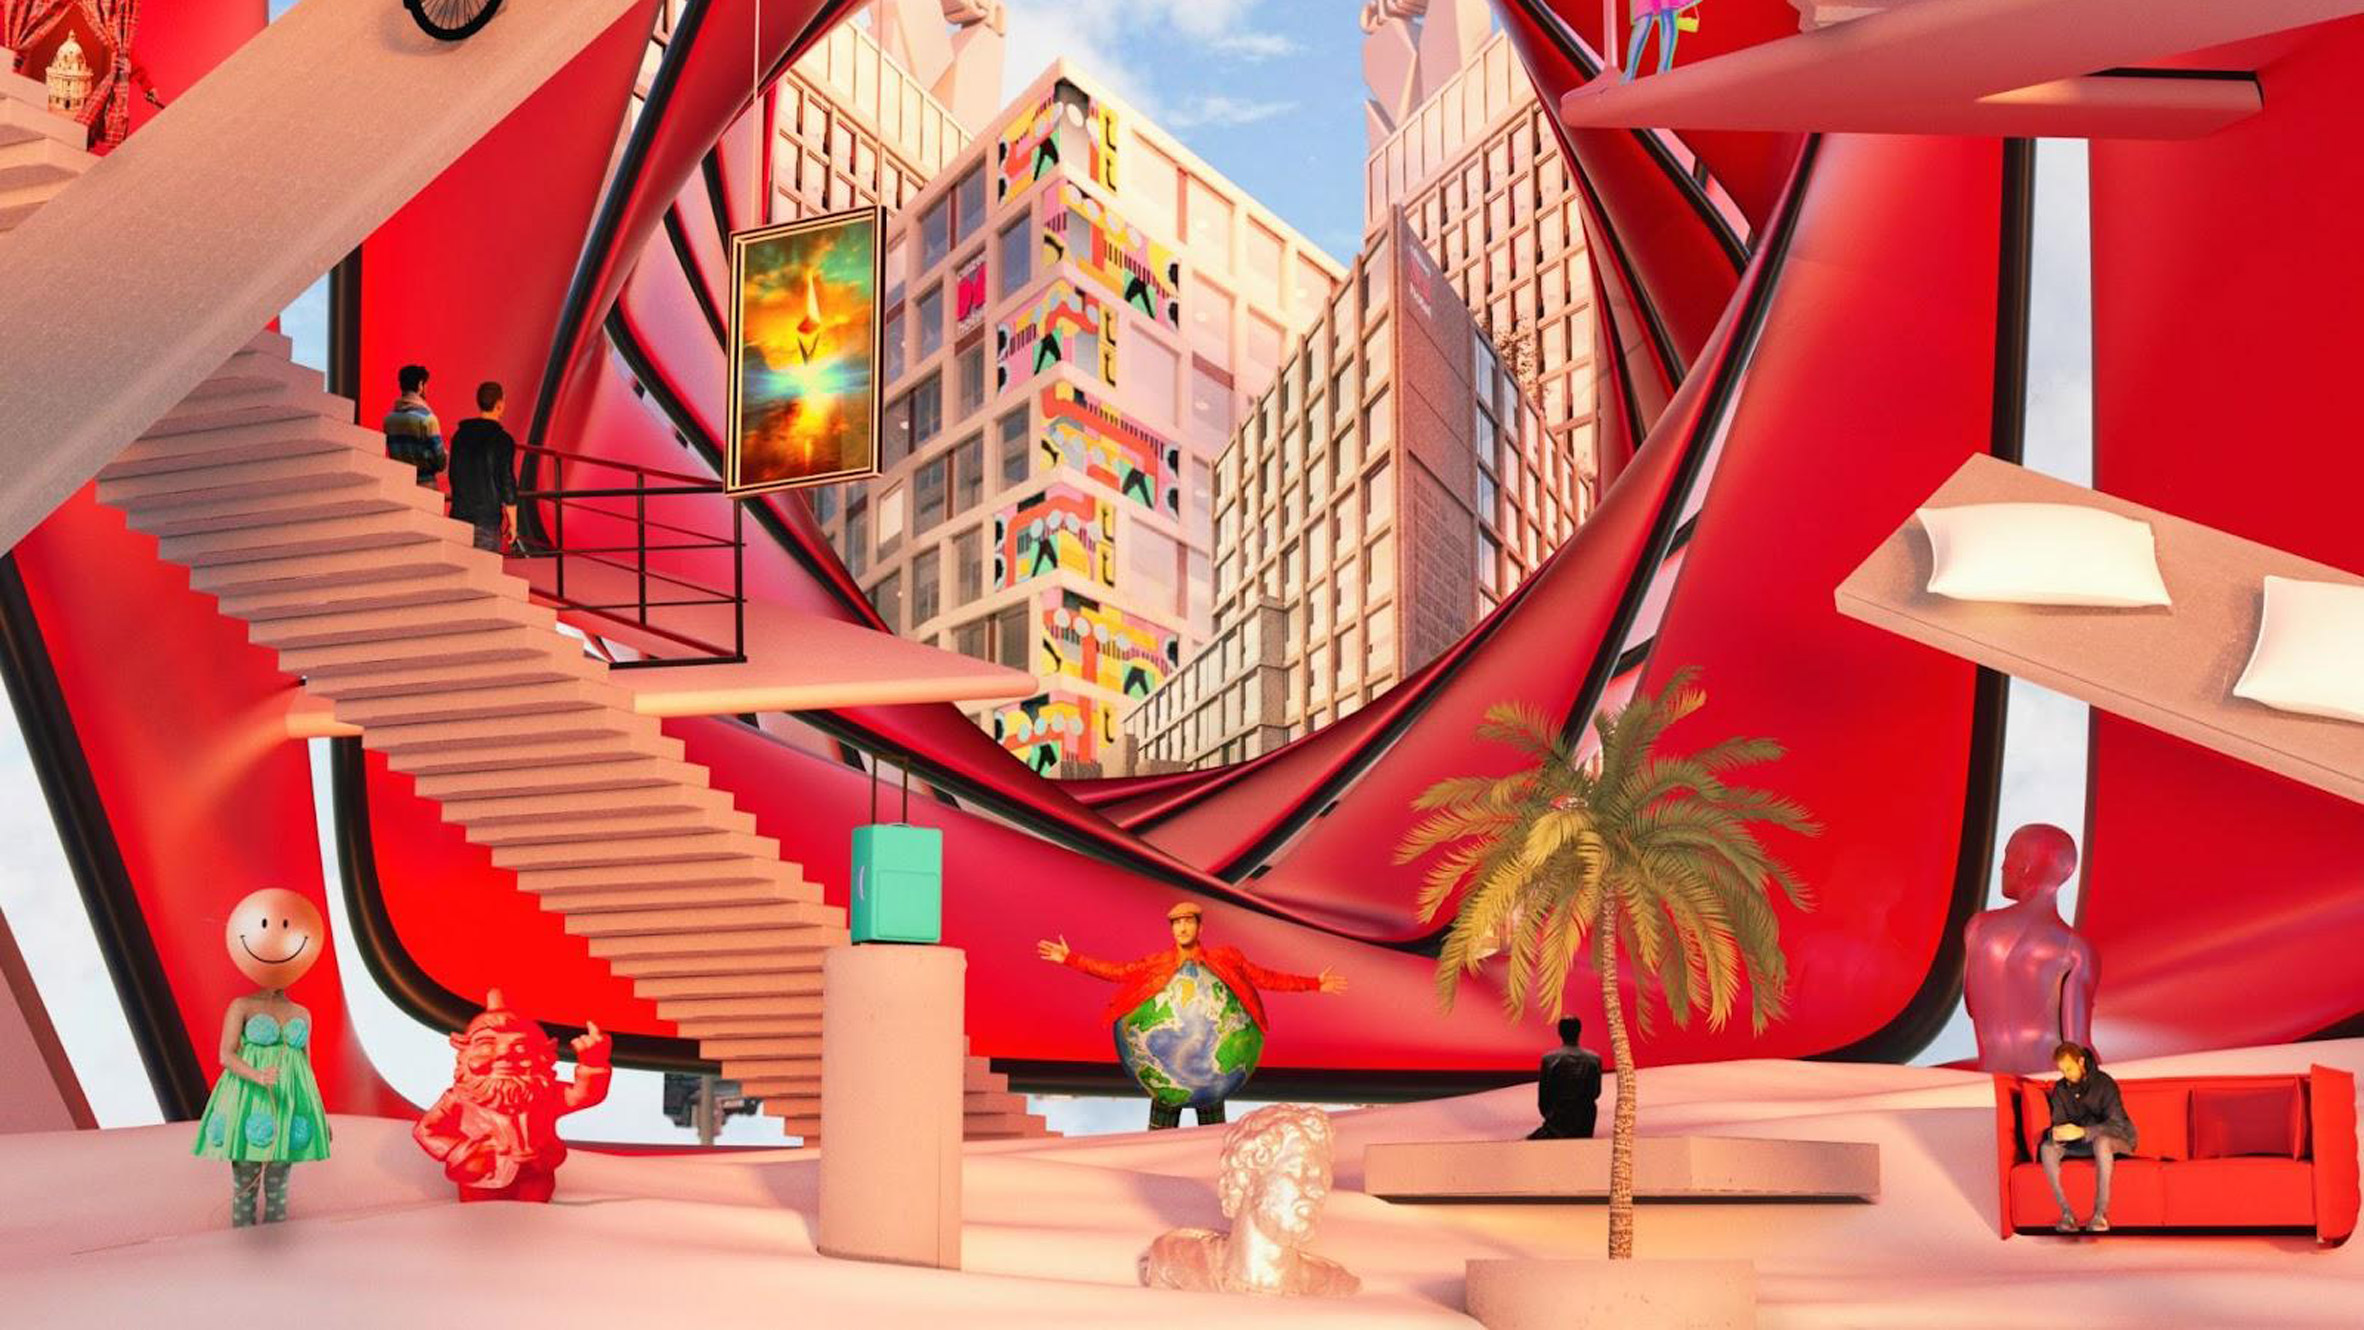 citizenm metaverse hotel ang